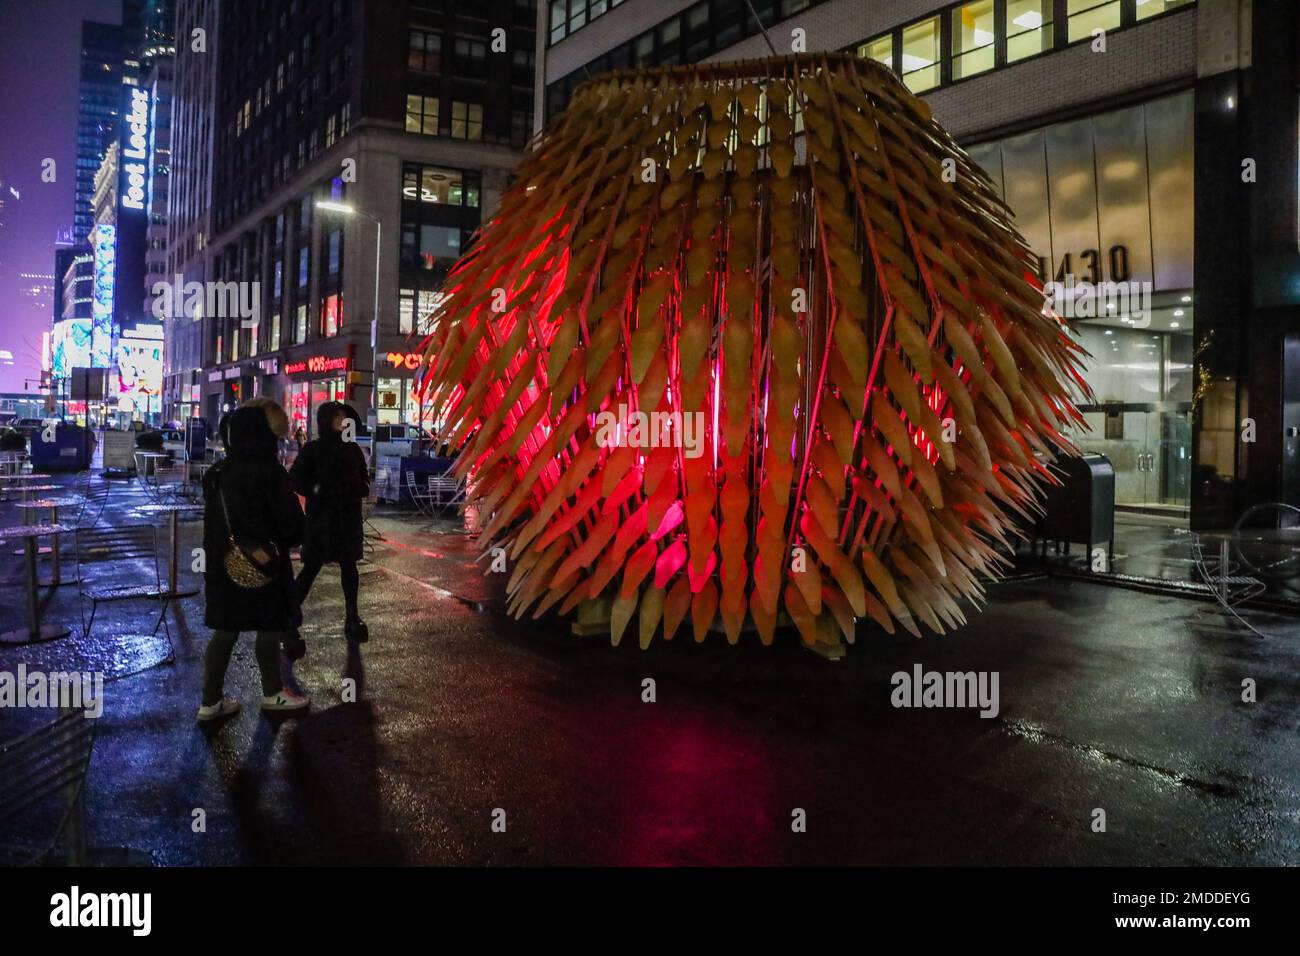 Kinetic light installation is now on display in the Garment District. Living Lantern measures 14 feet tall and 20 feet wide and is a symbol of hope, brightness and light. When touched by the wind, the installation “breathes” and comes to life with a mesmerizing movement. It is made of plywood, metal and 51 animated LED light bulbs. It is lit from the inside and pre-programmed with an animated light sequence that creates a mesmerizing experience. The facility was designed by two teams over Zoom during a pandemic. Since then, it has traveled the world - debuting at the World Science Festival in Stock Photo